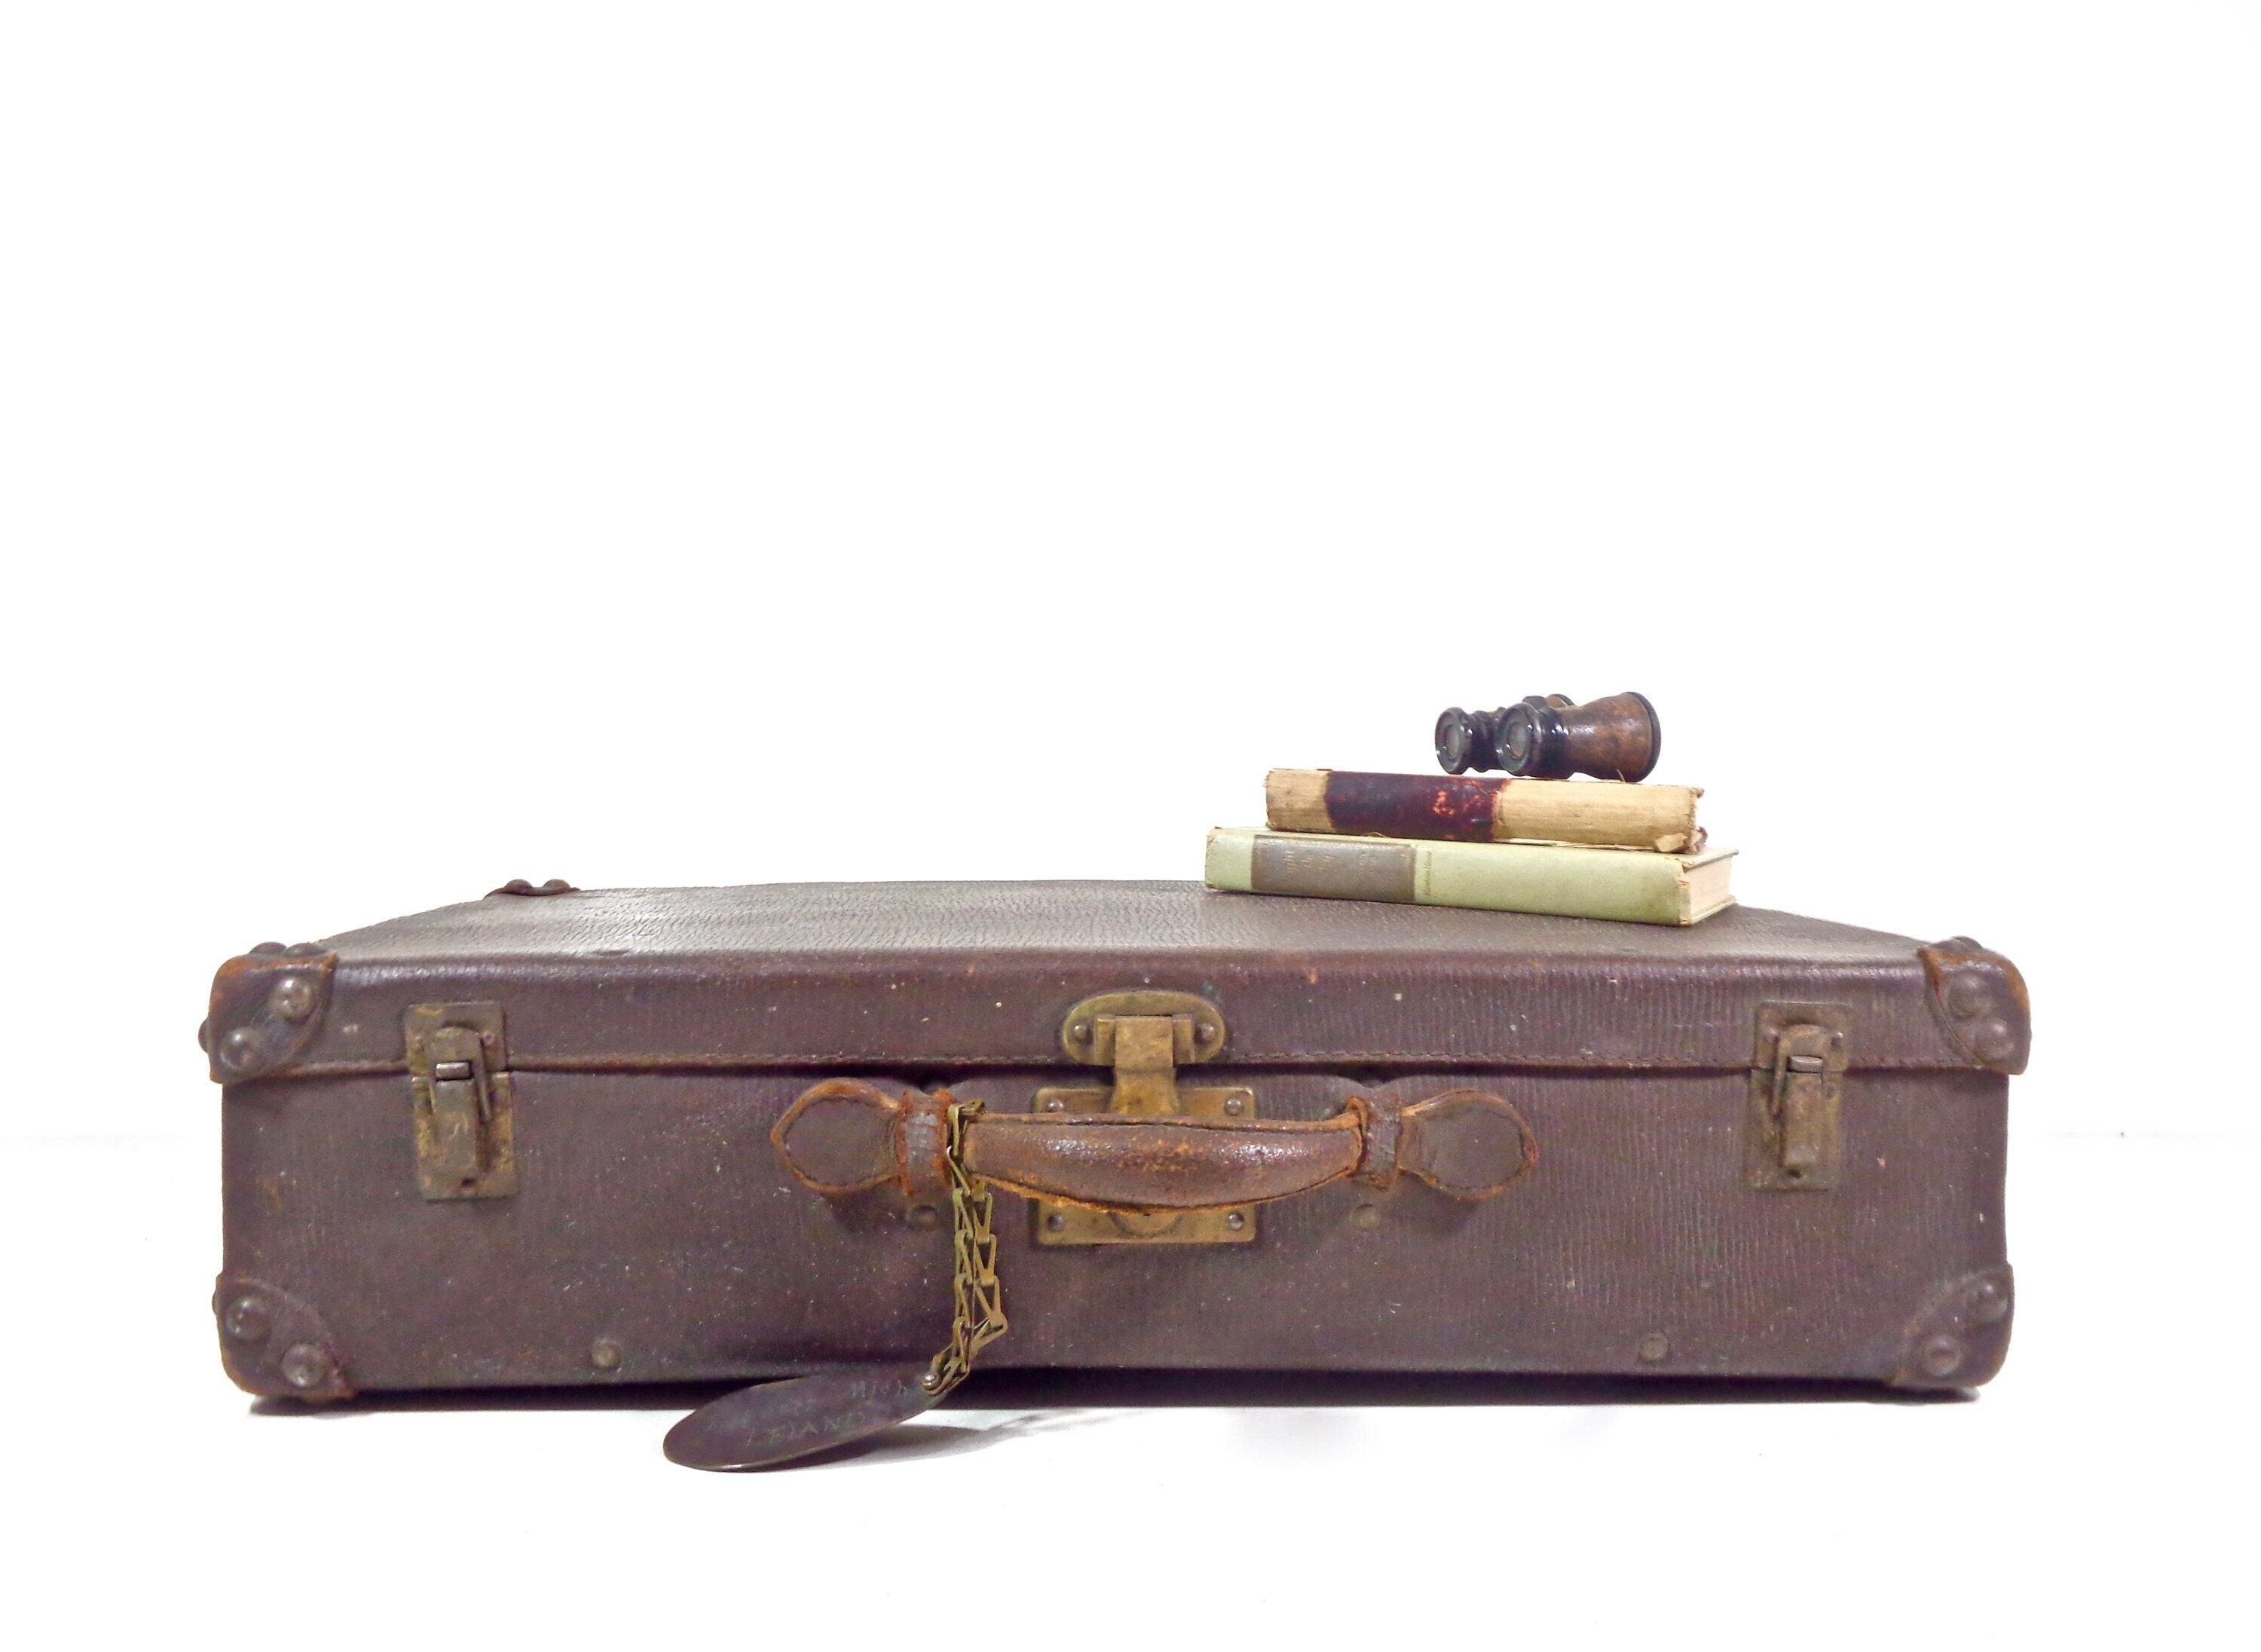 VINTAGE TRAVEL SEWING KIT. MINI SUITCASE HAND MADE IN CANADA